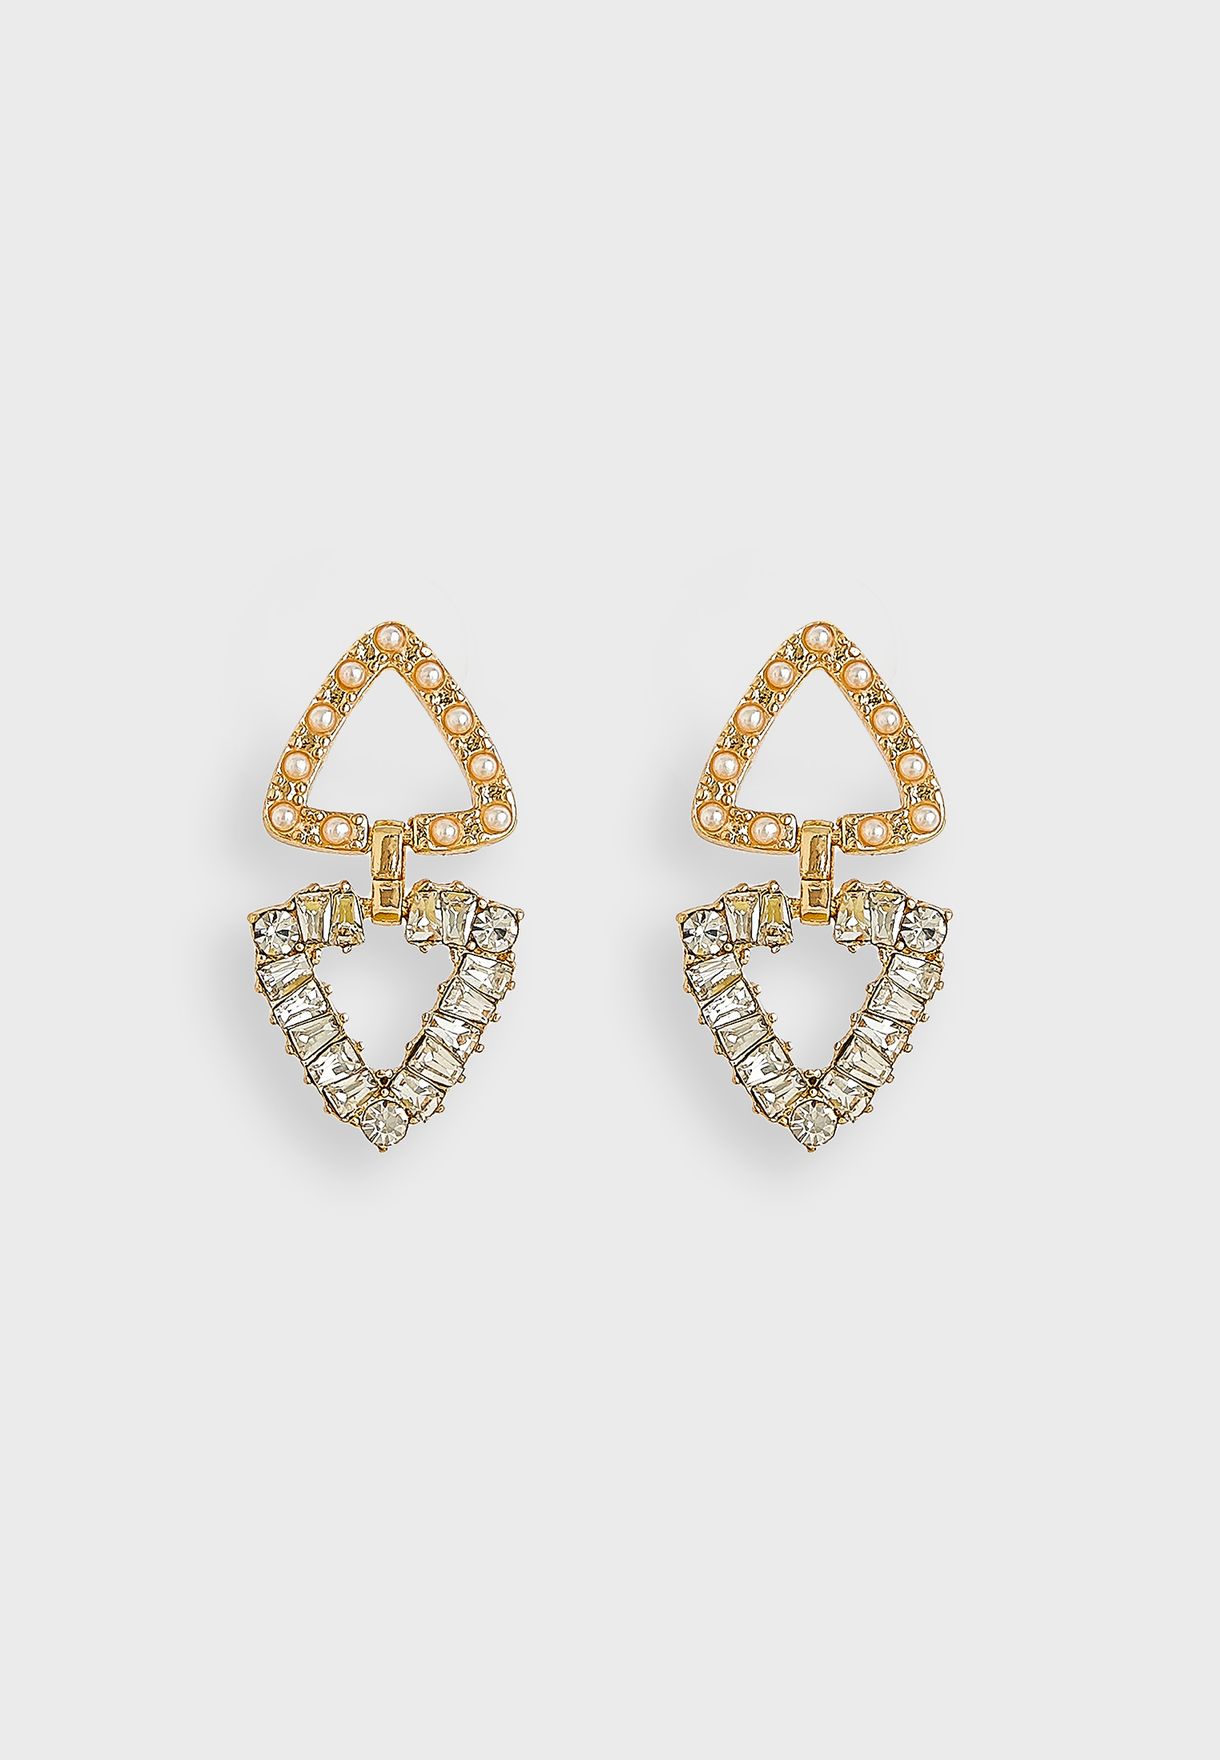 Peal And Baguette Stone Triangle Drop Earrings